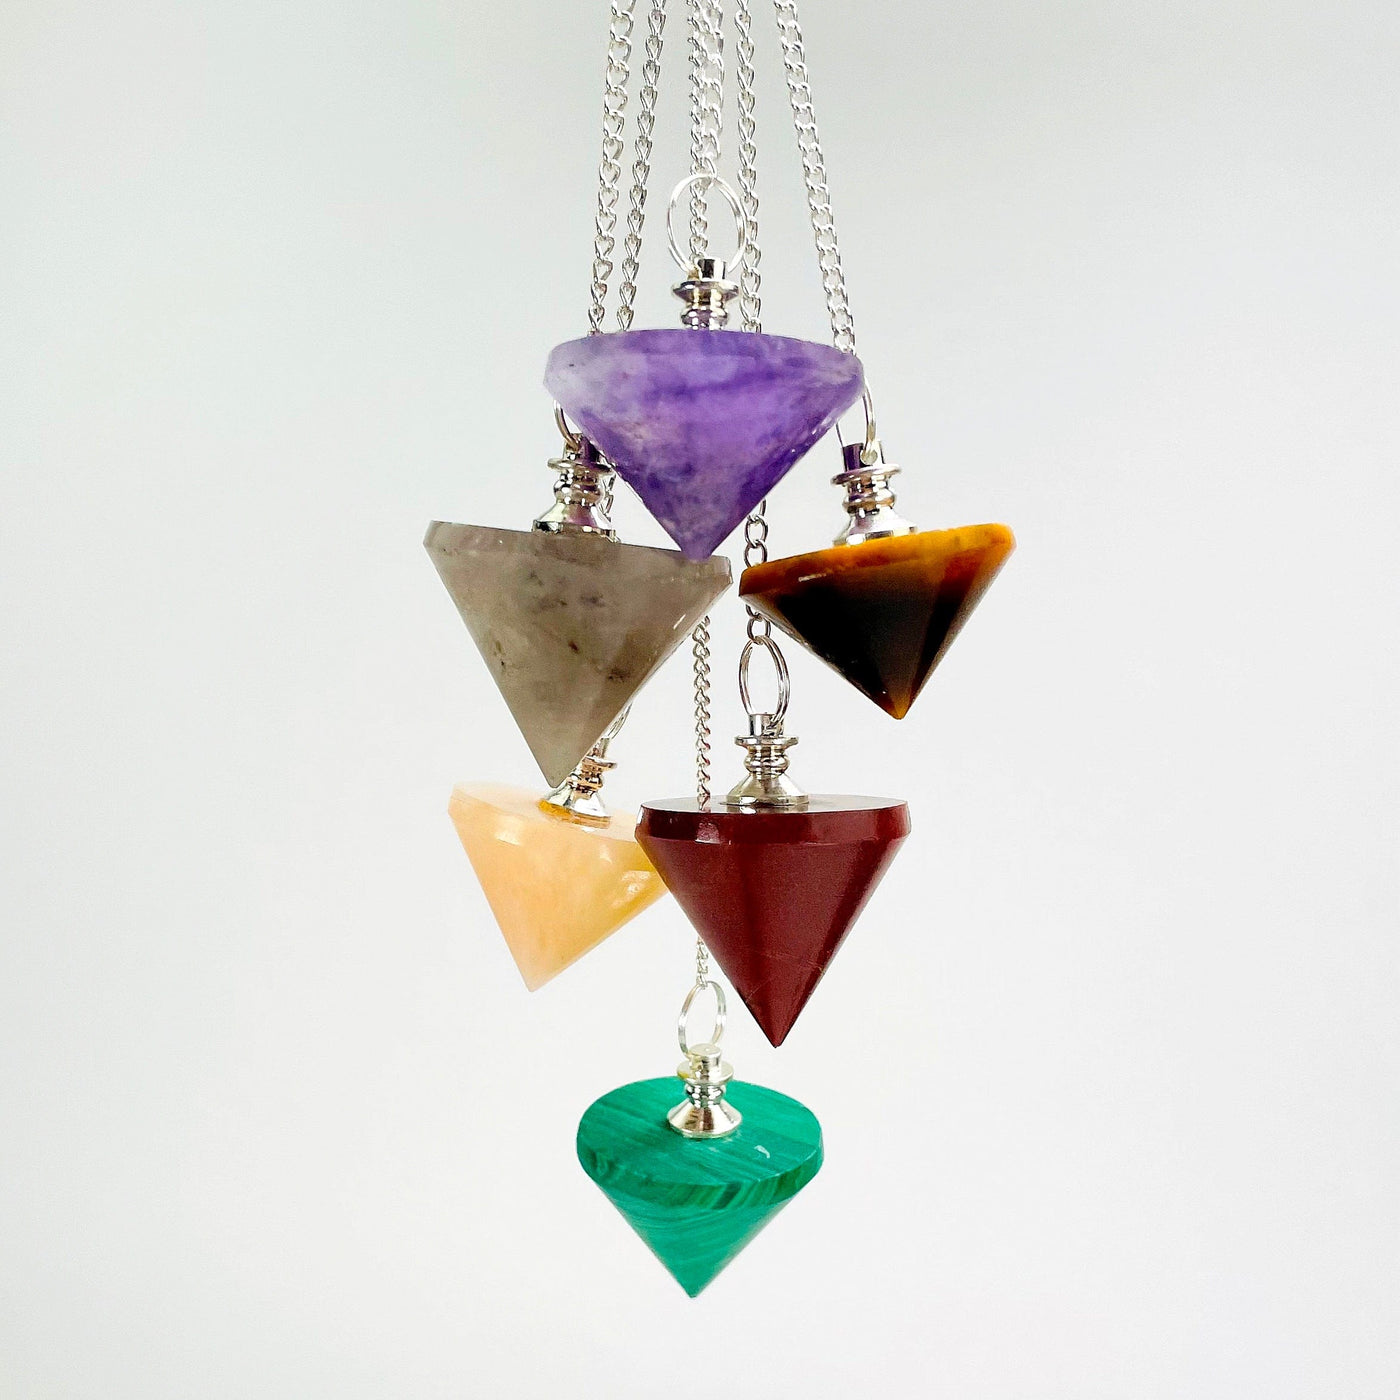 six different pendulum pendants hanging in front of white background